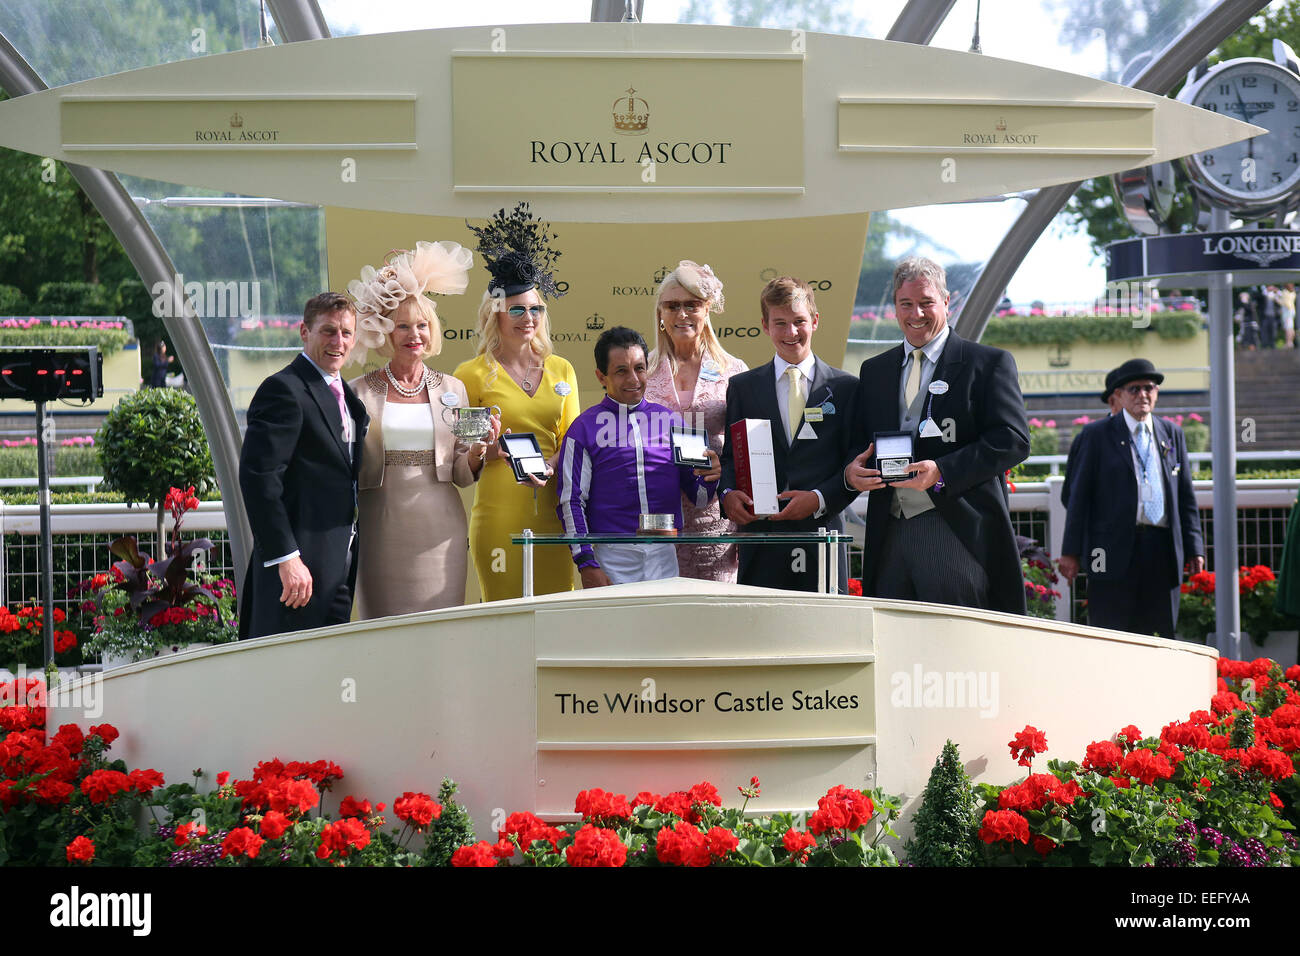 Royal Ascot, Hootenanny with Victor Espinoza after winning the Windsor Castle Stakes Stock Photo